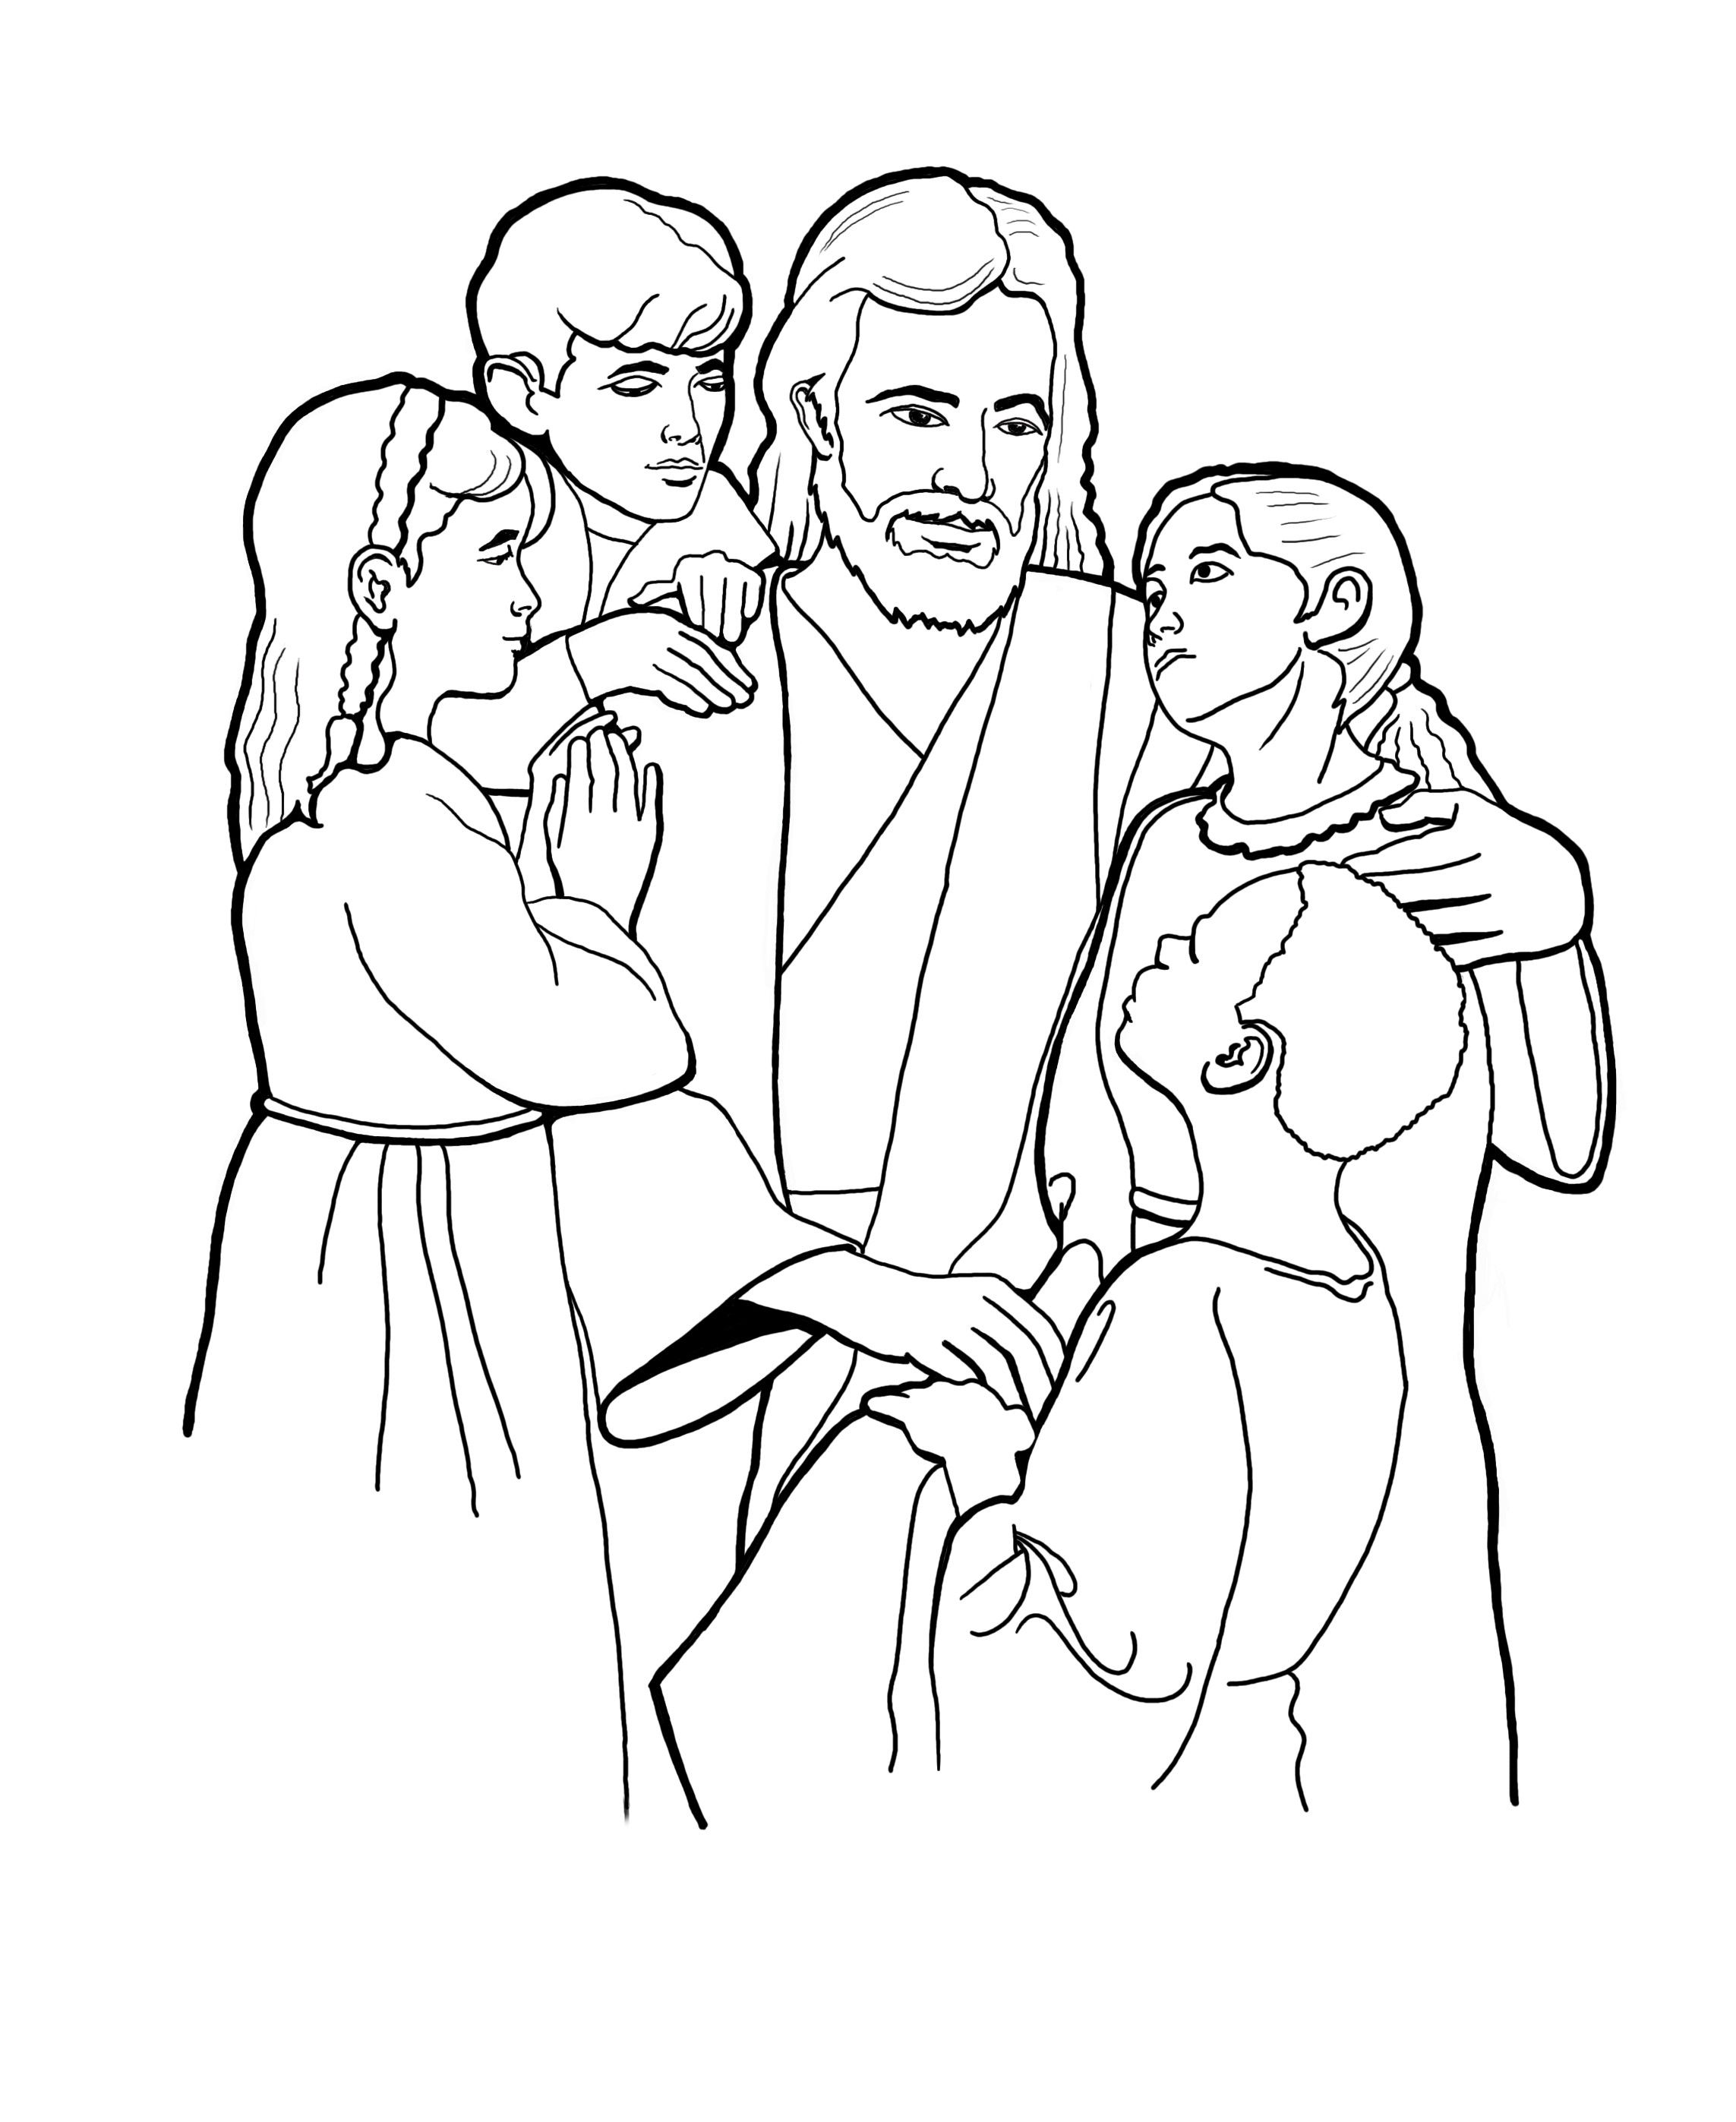 A sketch of Christ with children, based on the painting by Del Parson.